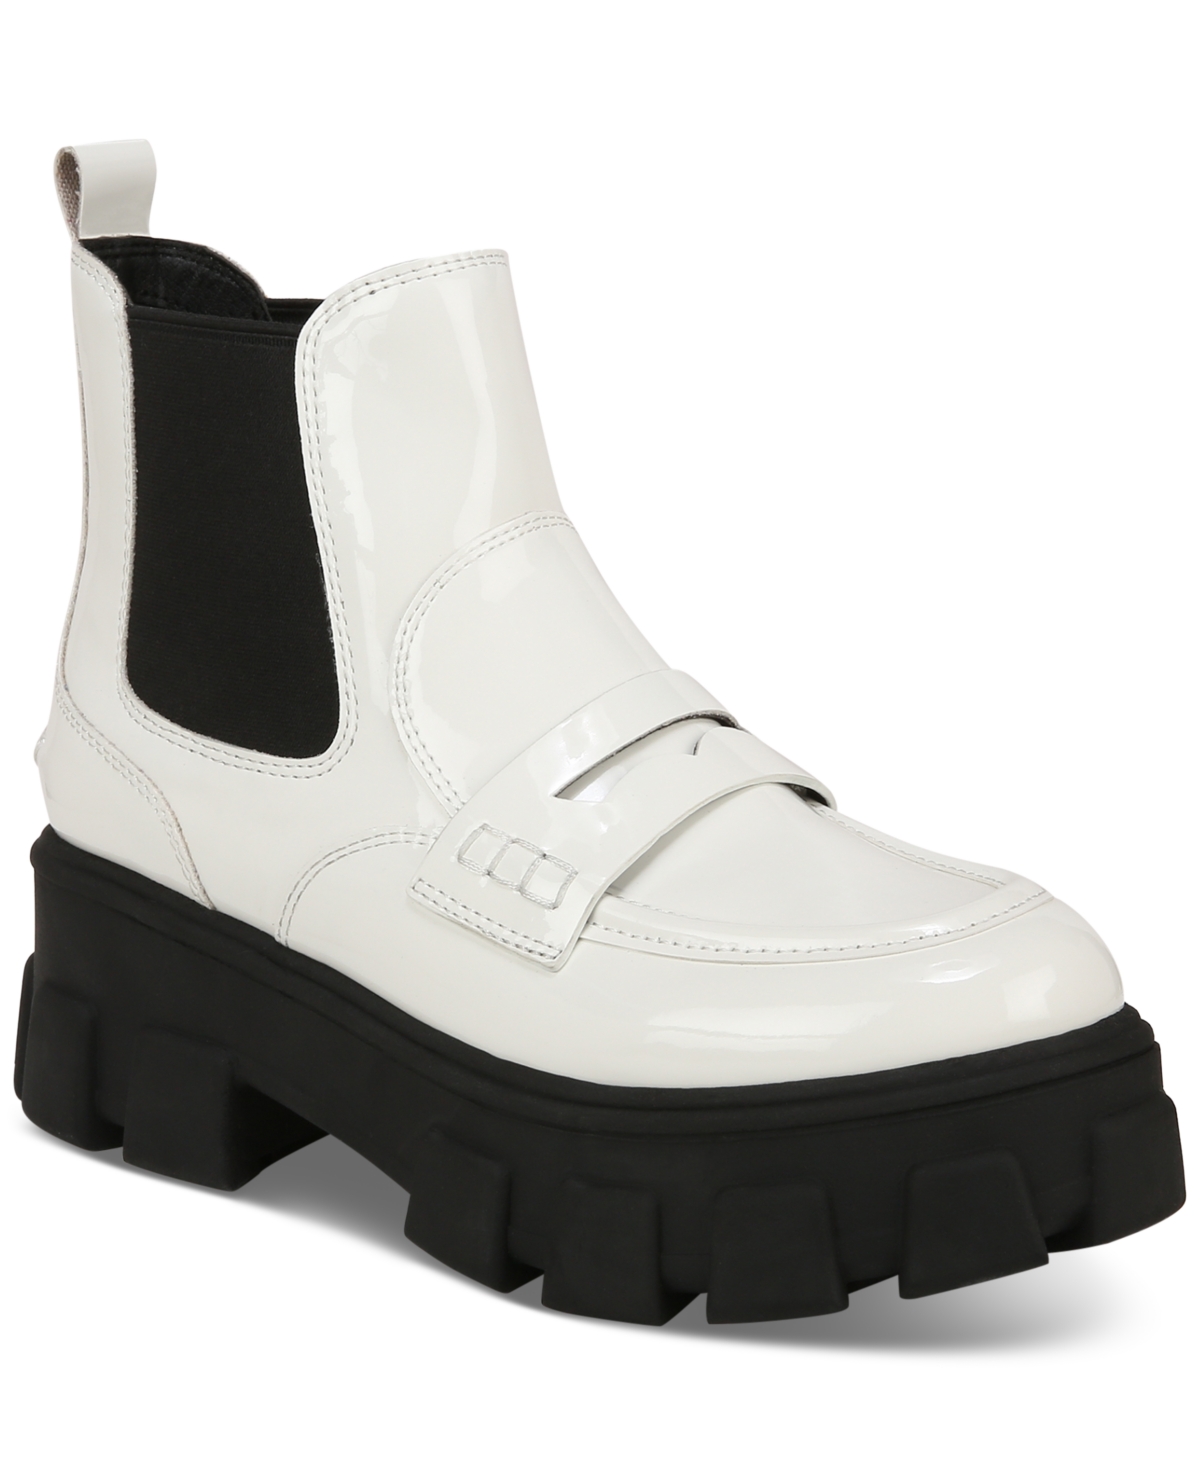 Circus Ny Women's Dia Tailored Platform Lug-sole Chelsea Booties In Bright White